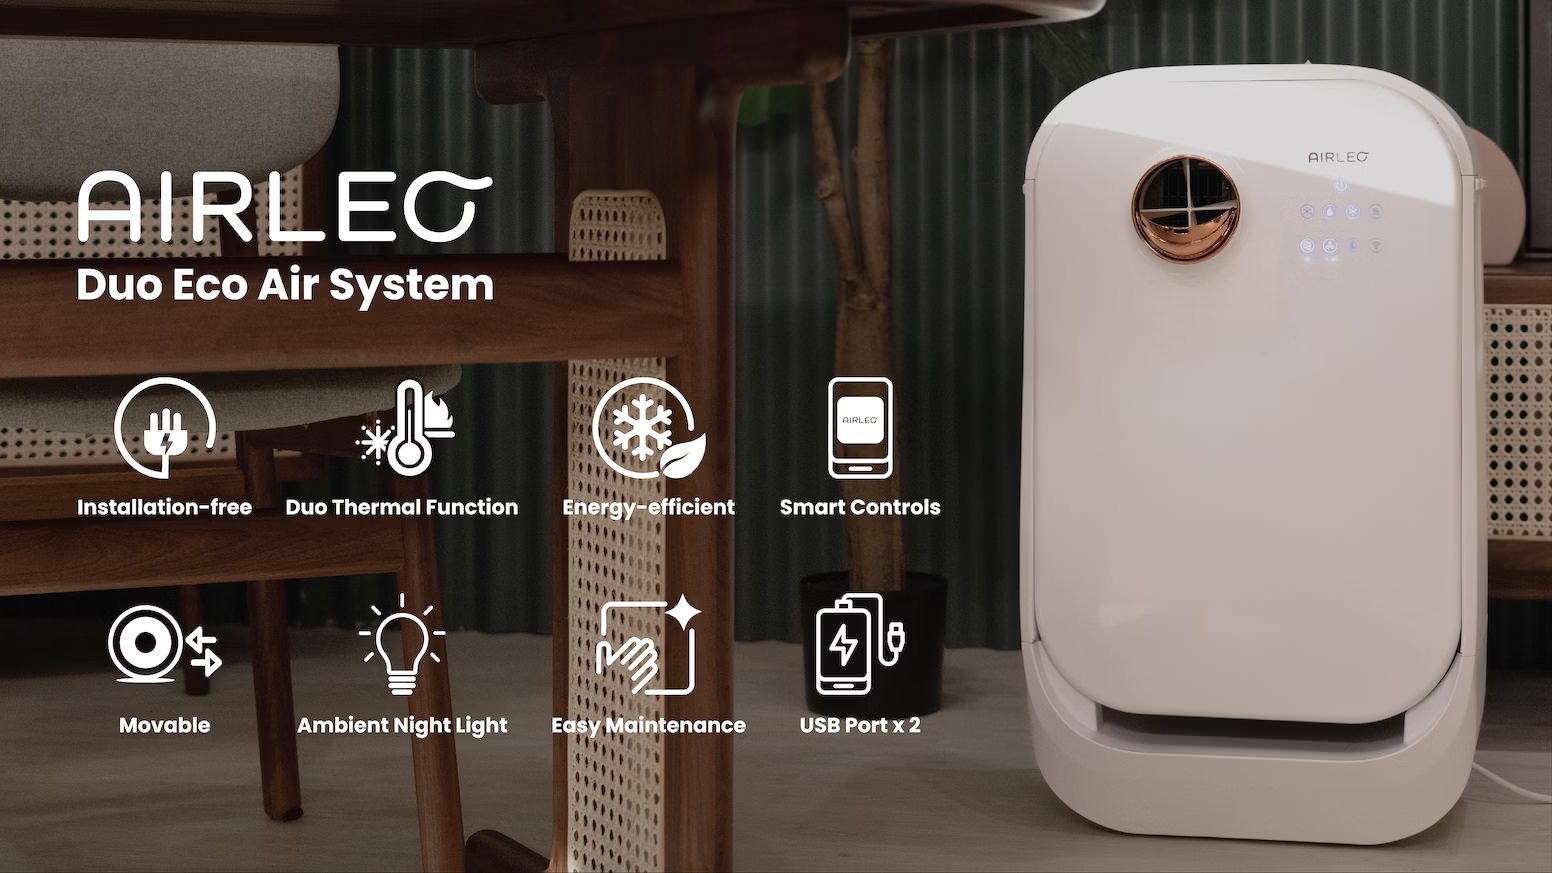 AIRLEO Mono Duo Eco Air Cooler Introduction